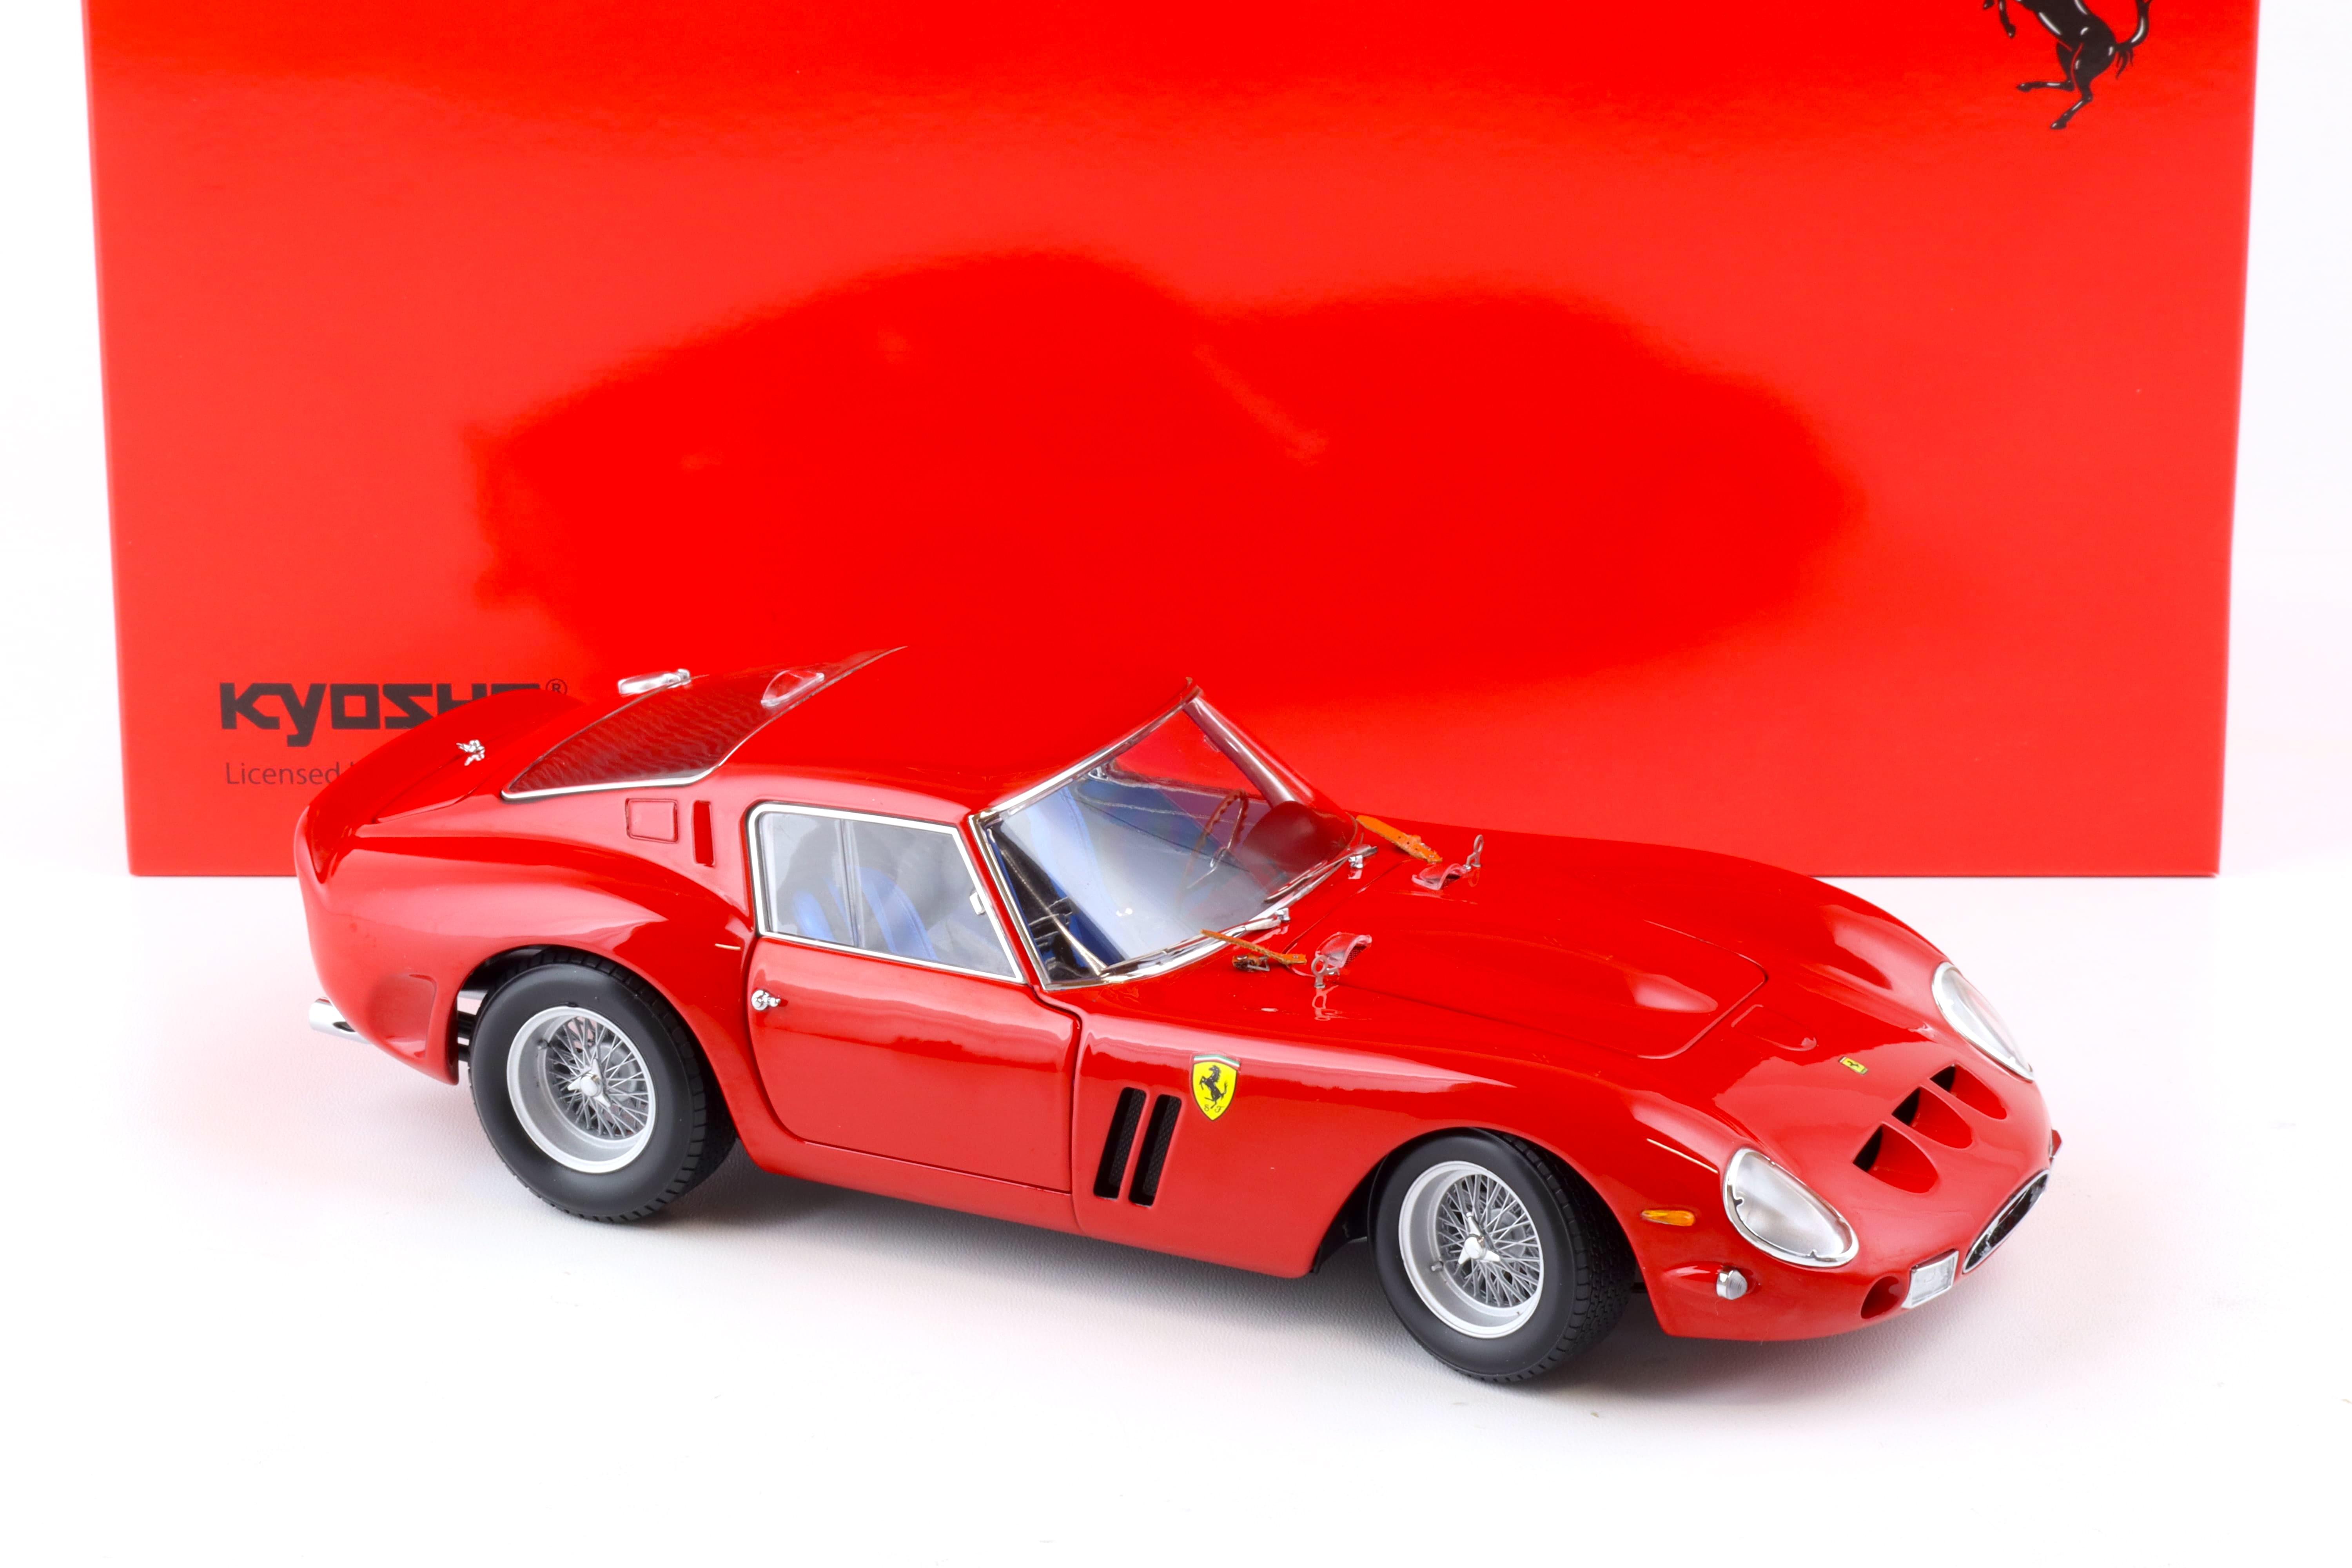 1:18 Kyosho Ferrari 250 GTO Coupe 1962 red 08438R Diecast/ openings